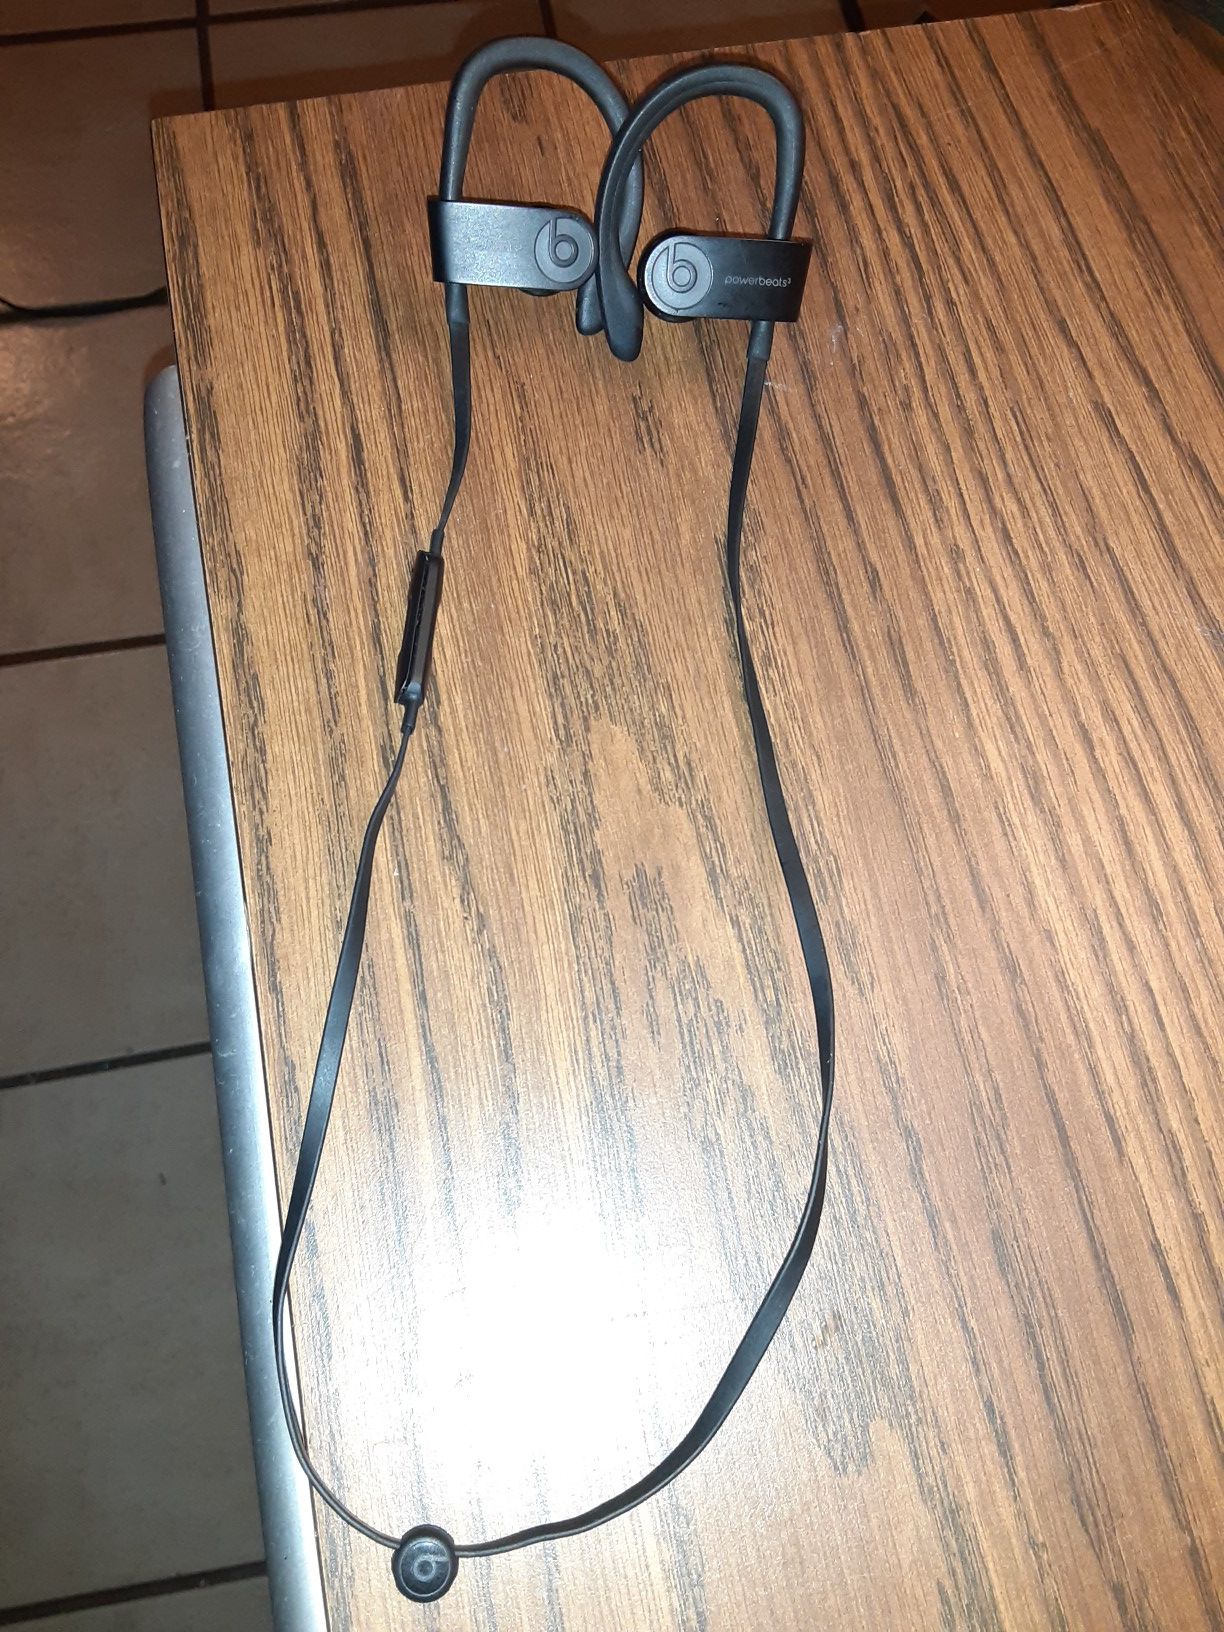 Wireless Dr. Dre powerbeats3 with the charging cord. $45 OBO